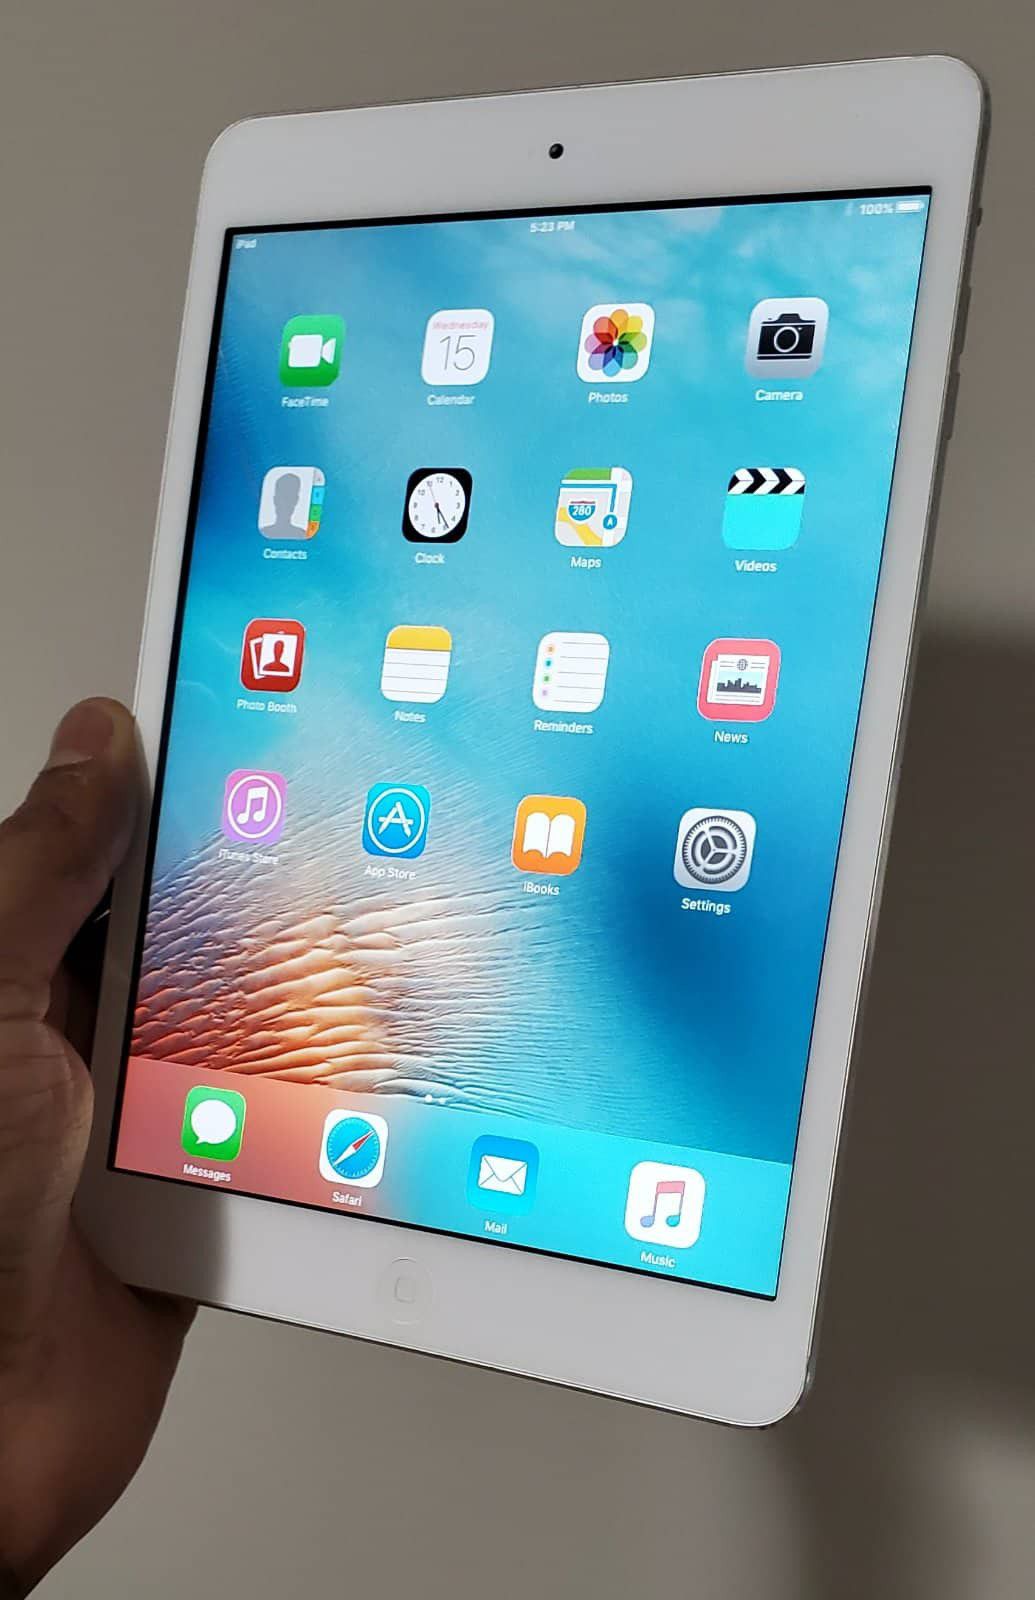 iPad Mini 1 | 1st Generation | Wi-Fi Internet access | 7 inch iPad | Usable with Wi-Fi ONLY